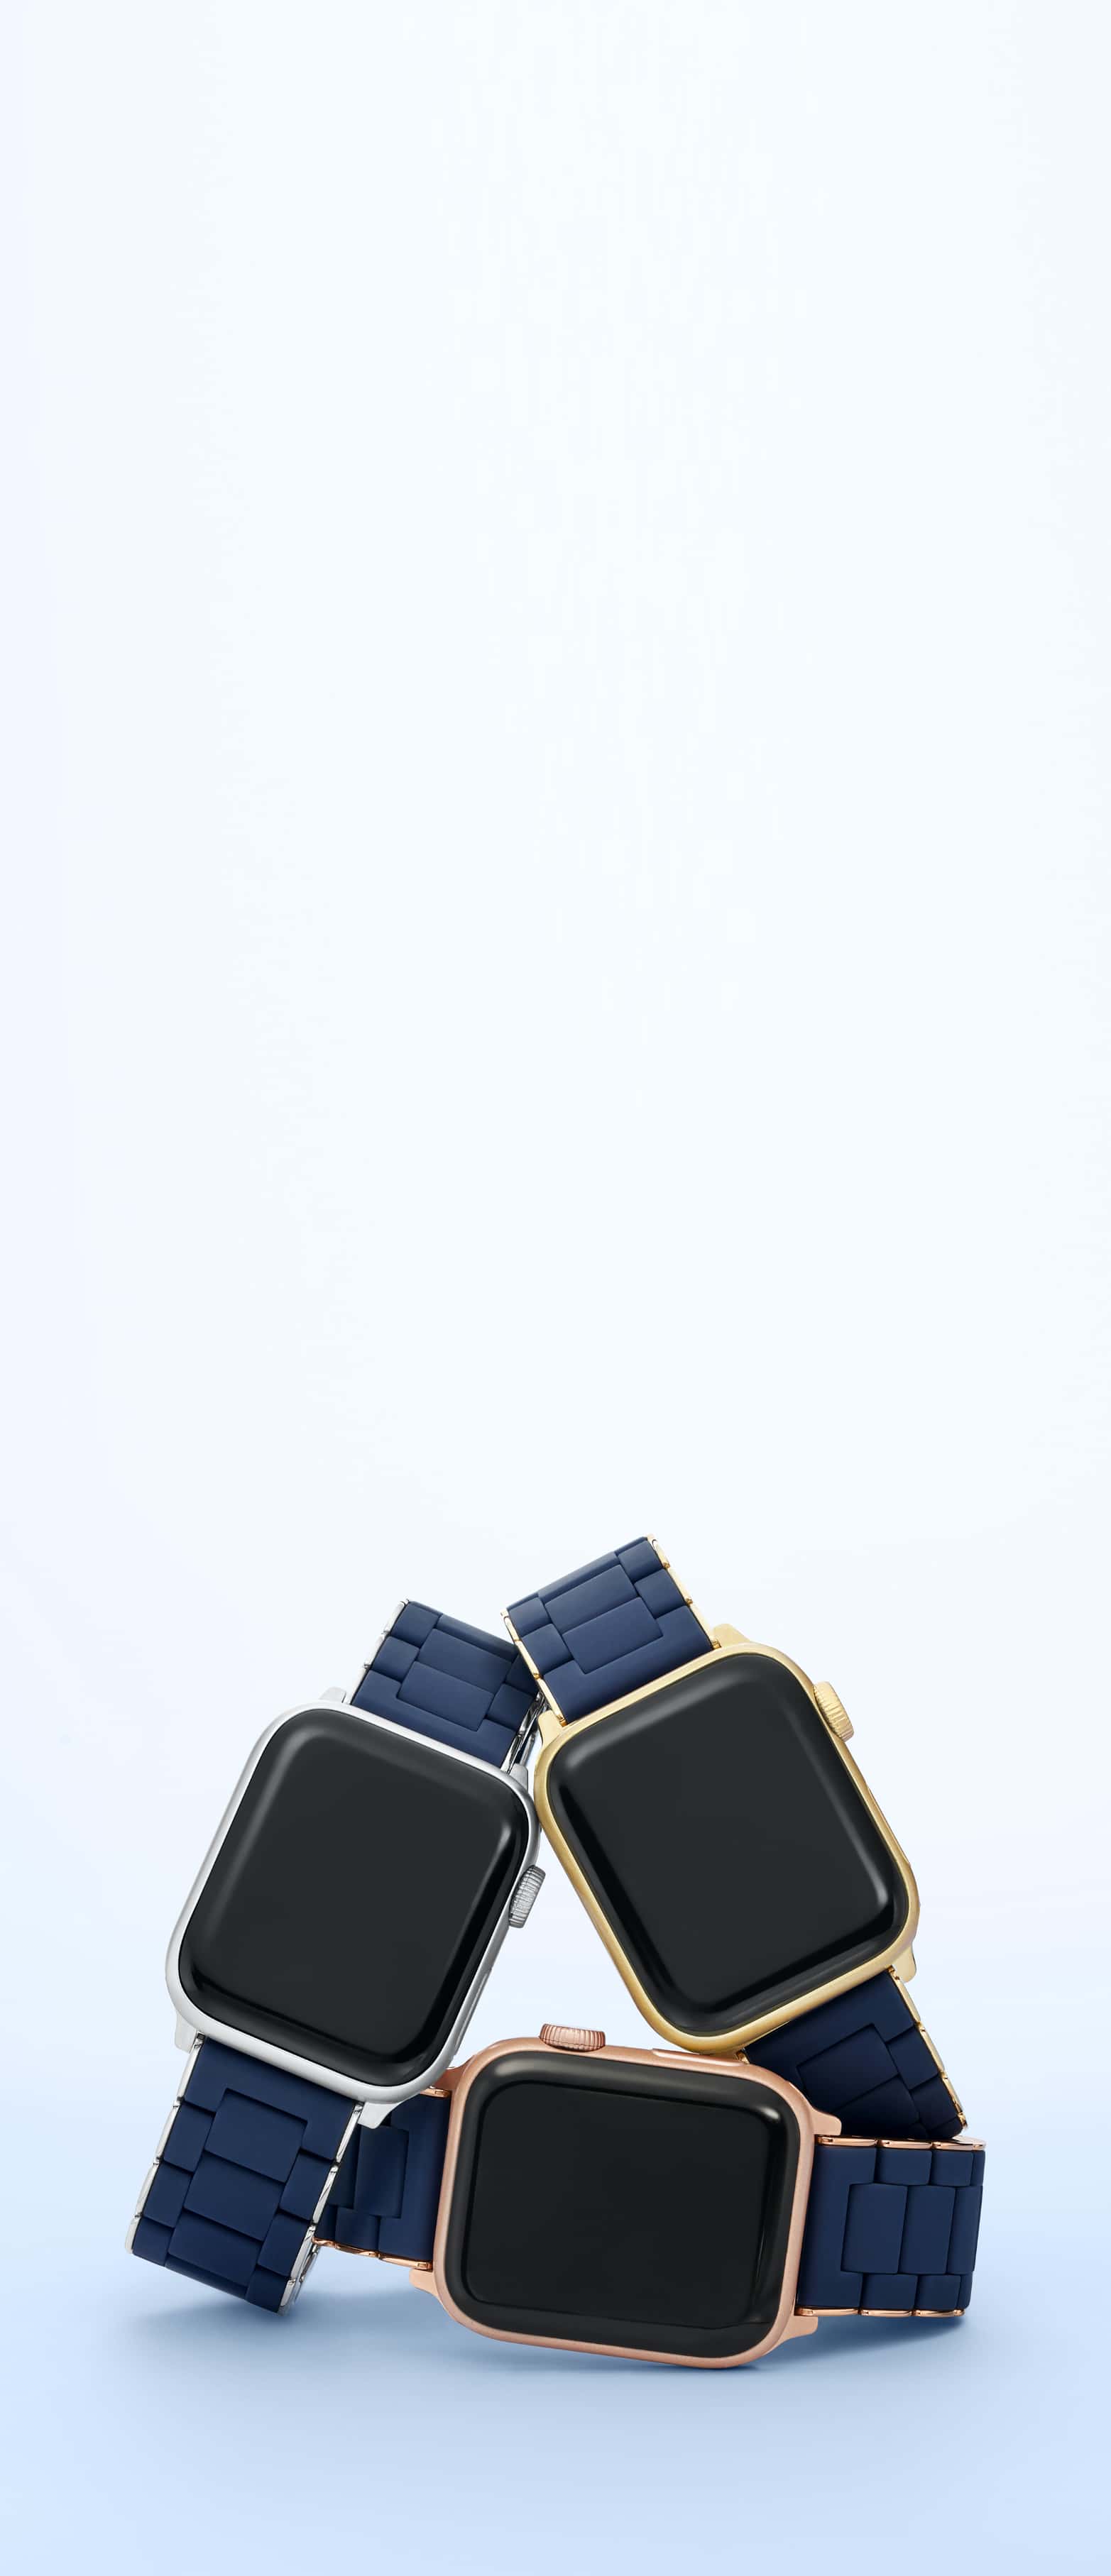 Three Apple Watches with midnight blue bands by MICHELE in sterling, gold and rose gold plating